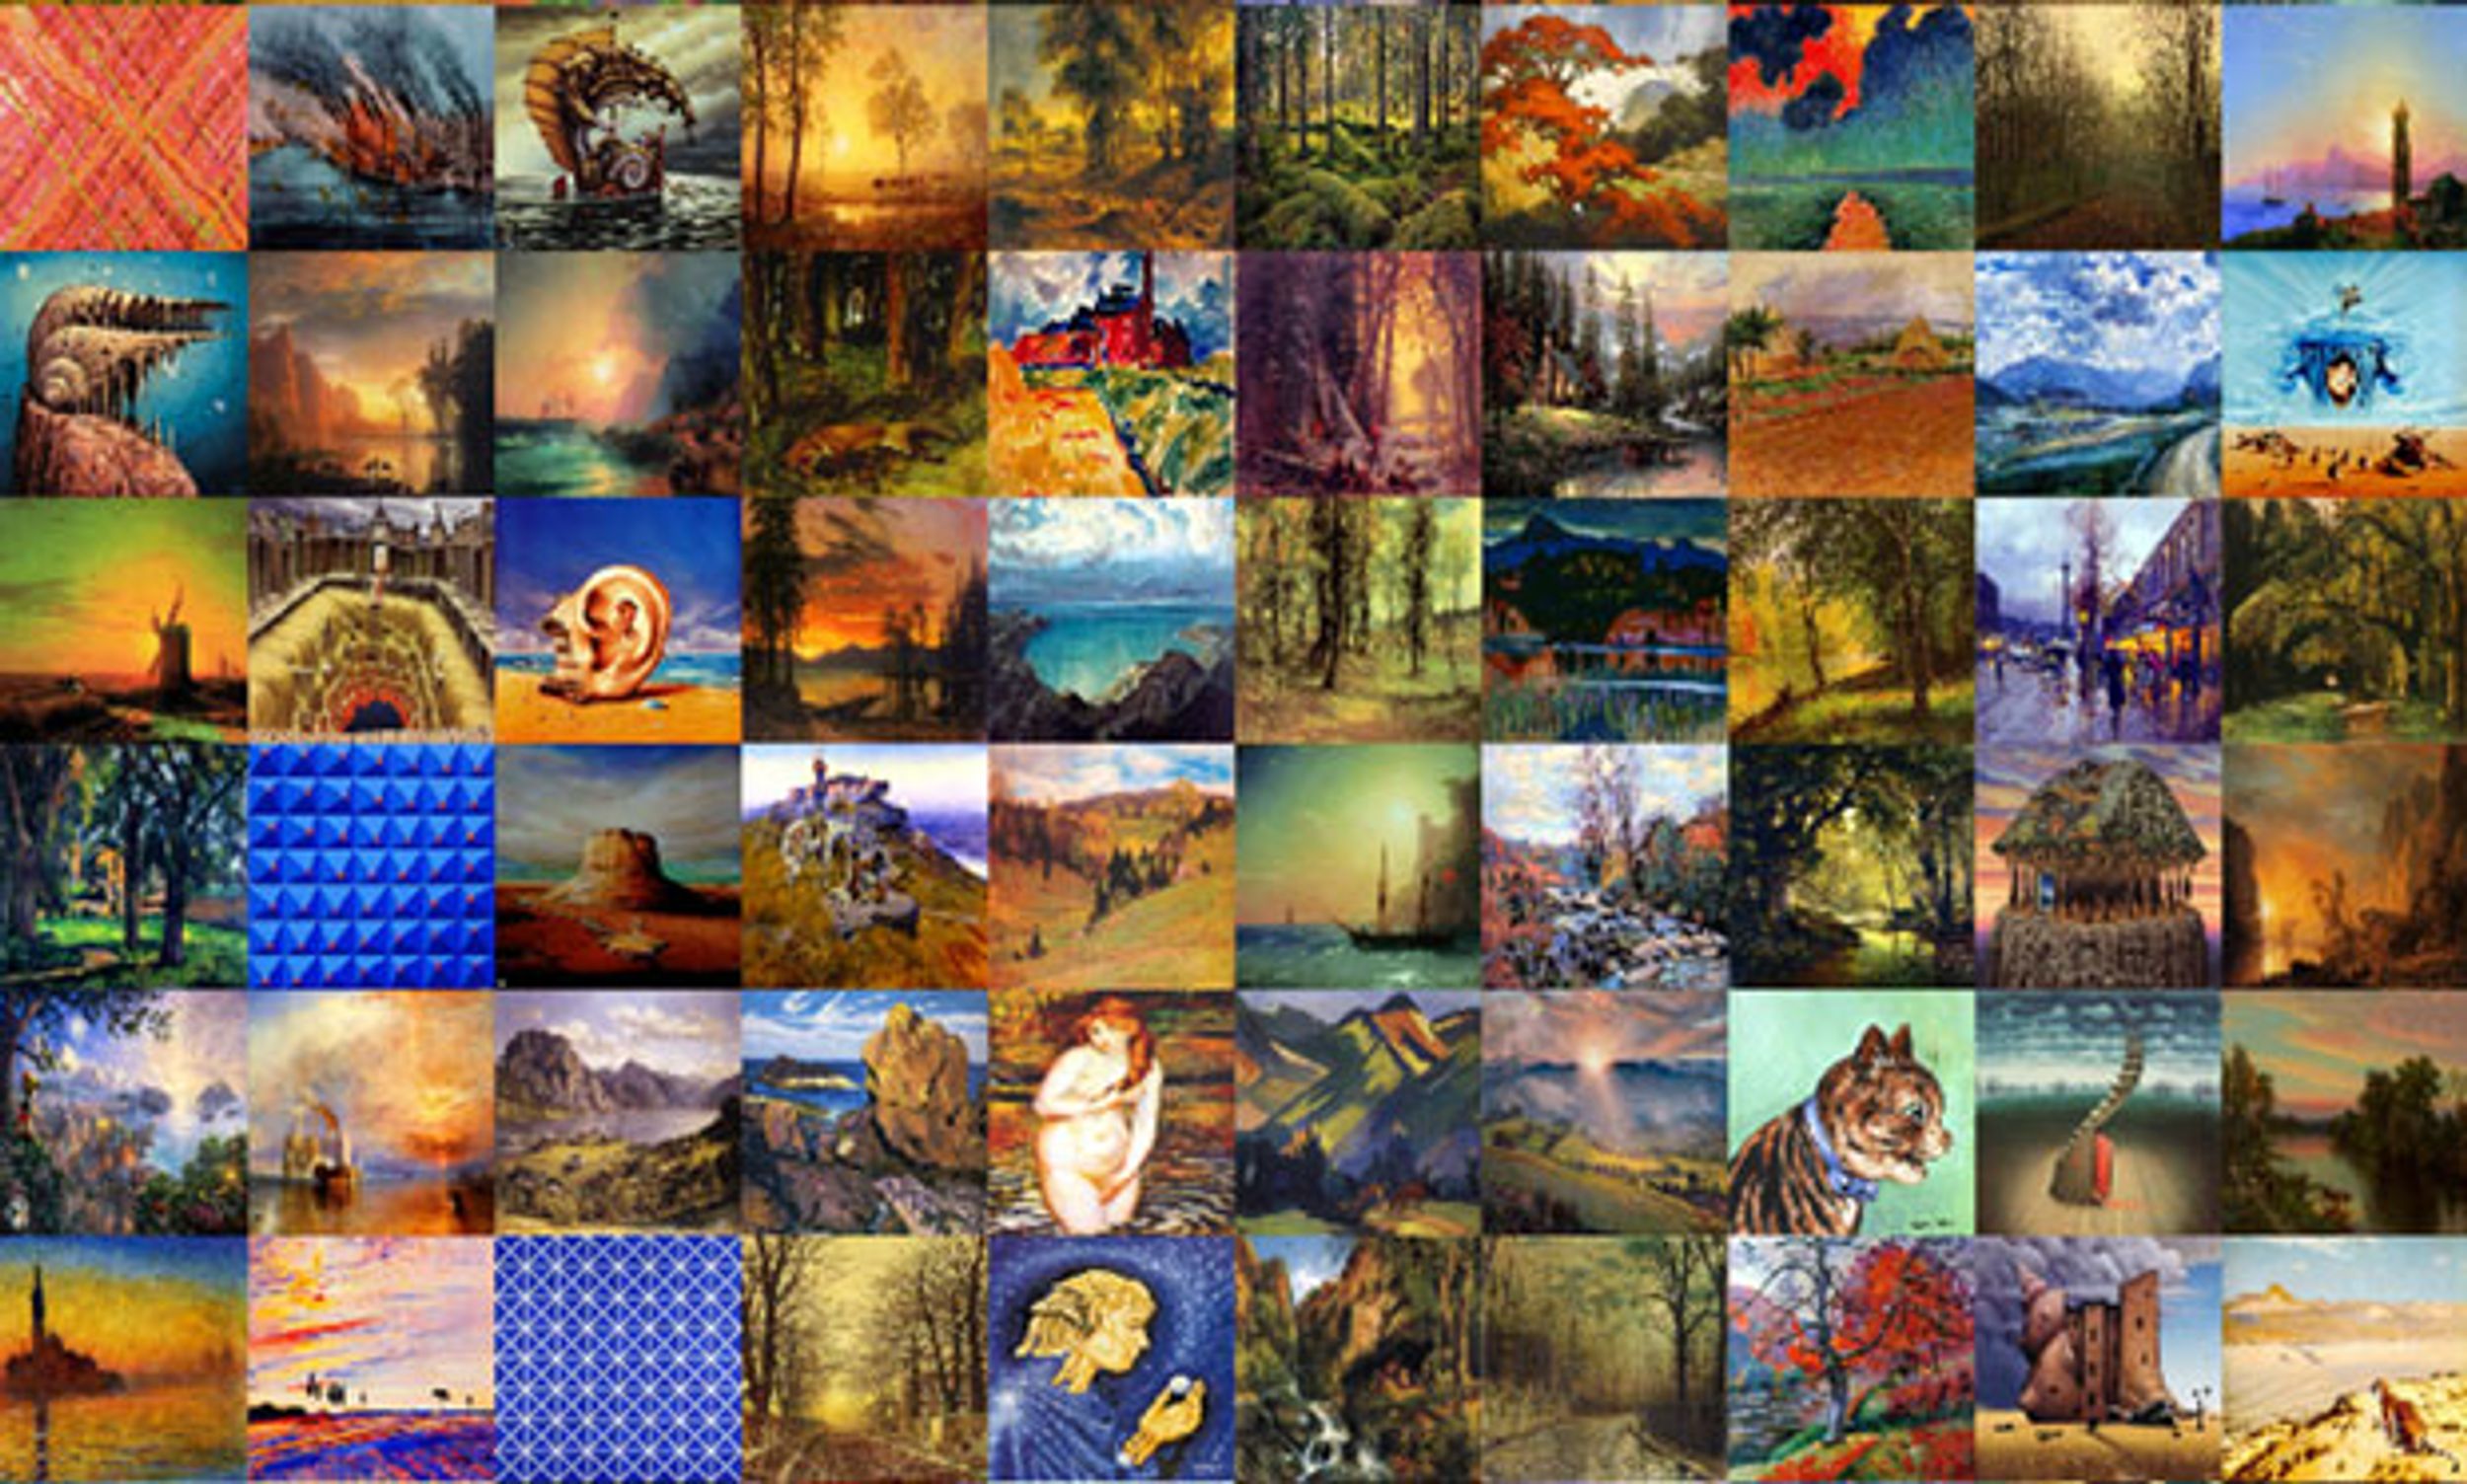 Image of top 100 artworks from the WikiArt collections with the highest predicted aesthetic scores.